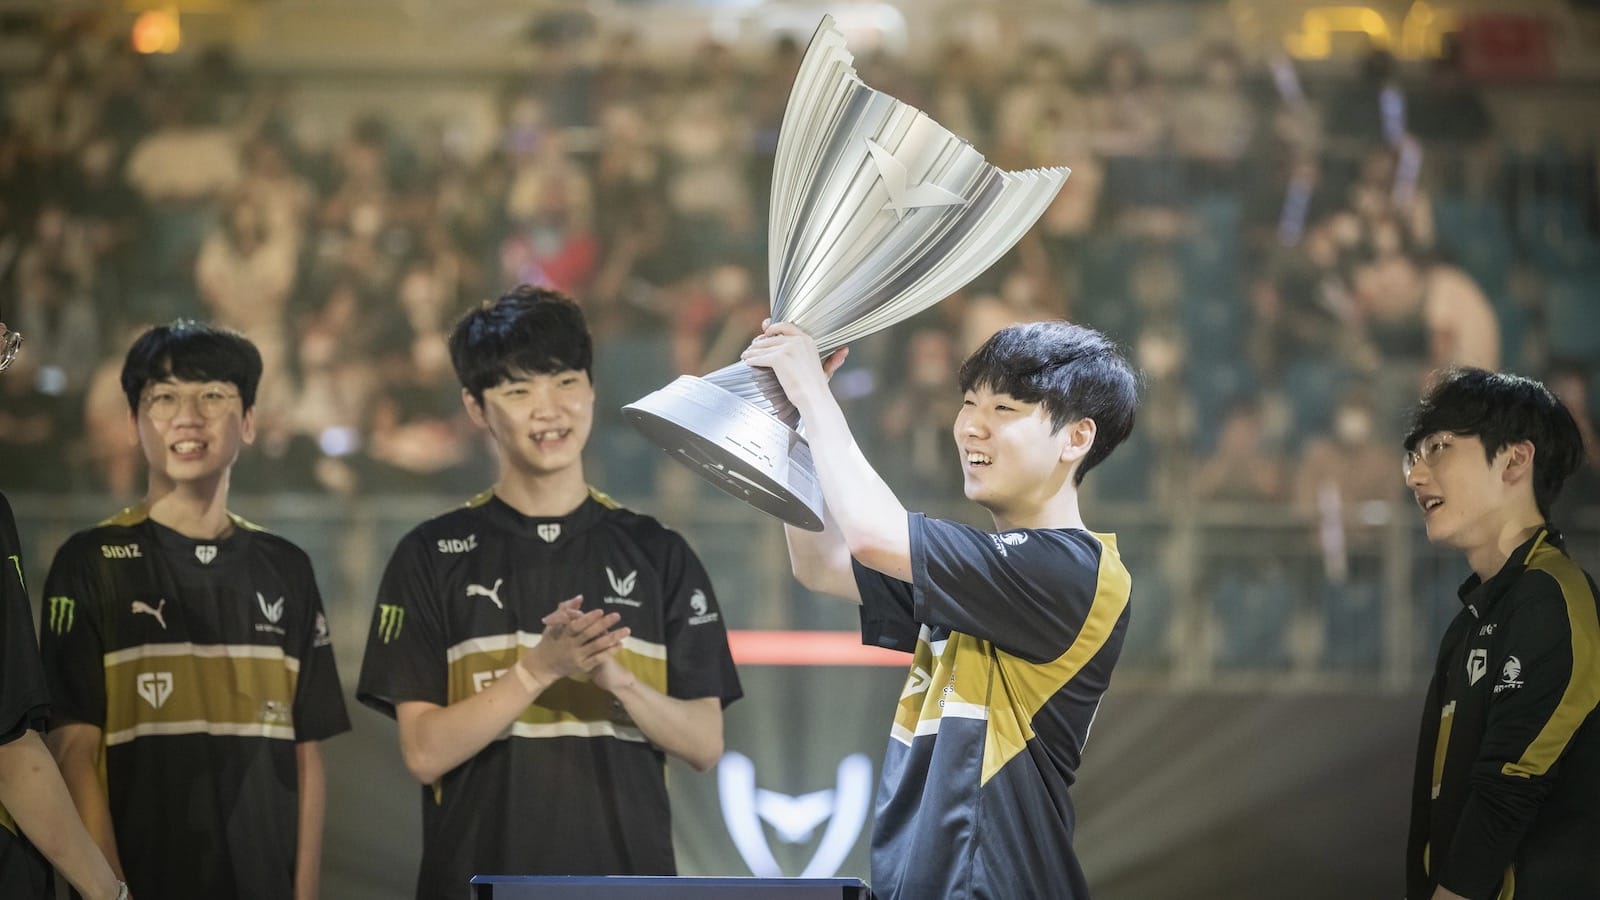 LoL Worlds Finals Predictions - A new era for Europe dawns